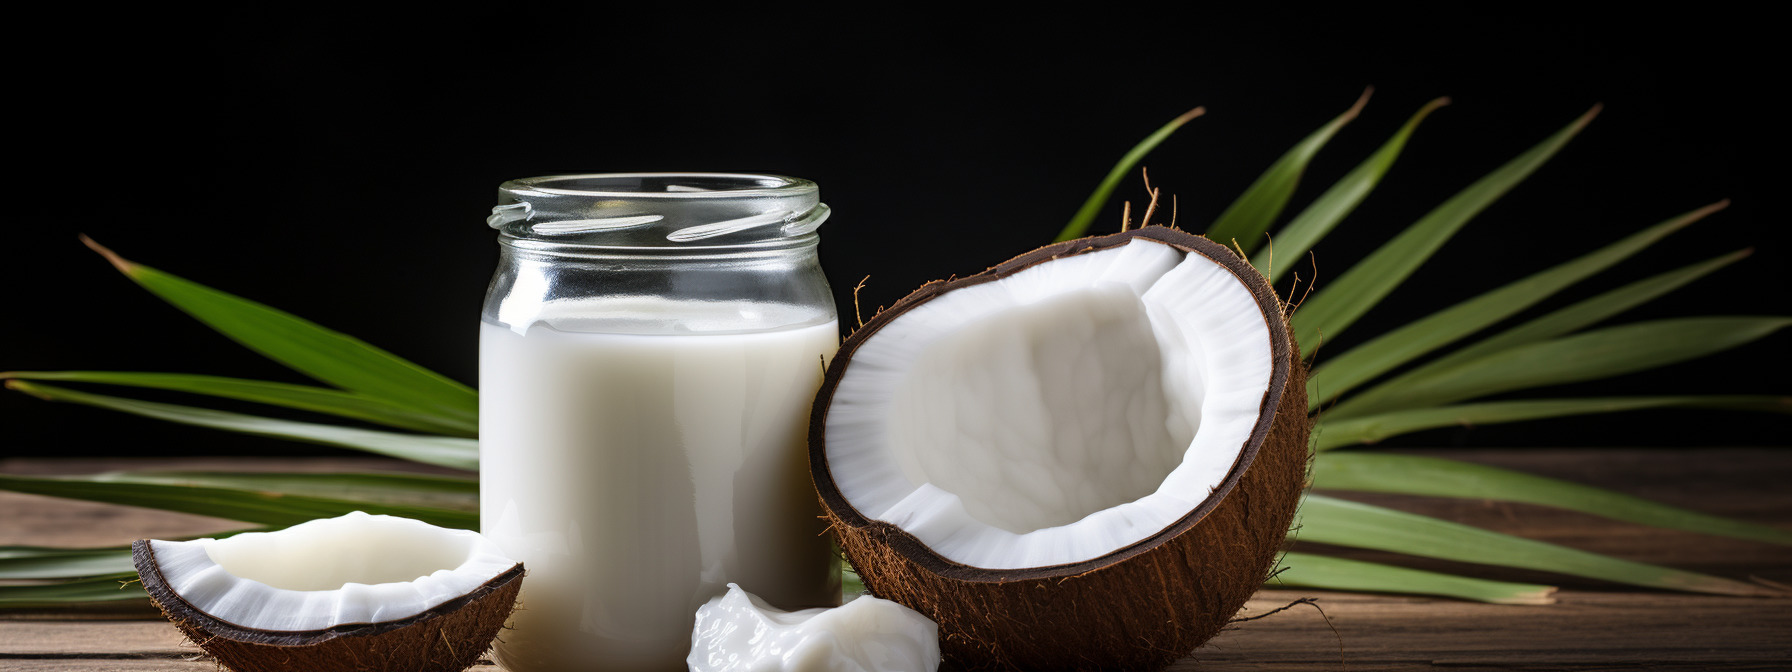 The Untapped Potential Of Virgin Coconut Oil: A Deep Dive Into Its Role In Cell Protection And Cancer Therapy